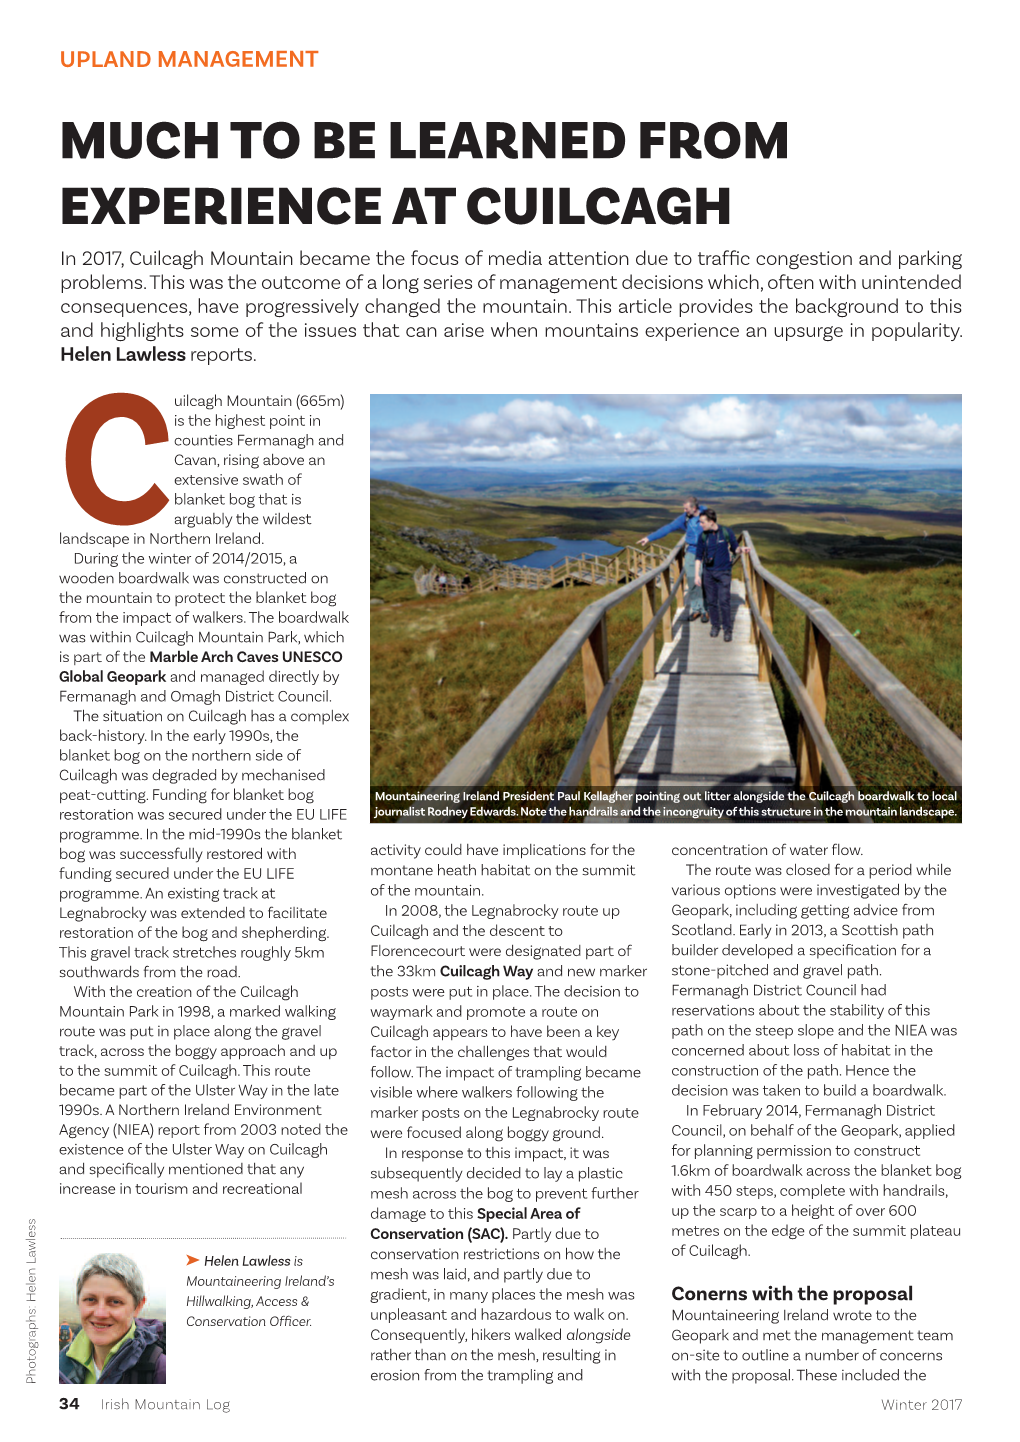 CUILCAGH in 2017, Cuilcagh Mountain Became the Focus of Media Attention Due to Trafﬁc Congestion and Parking Problems